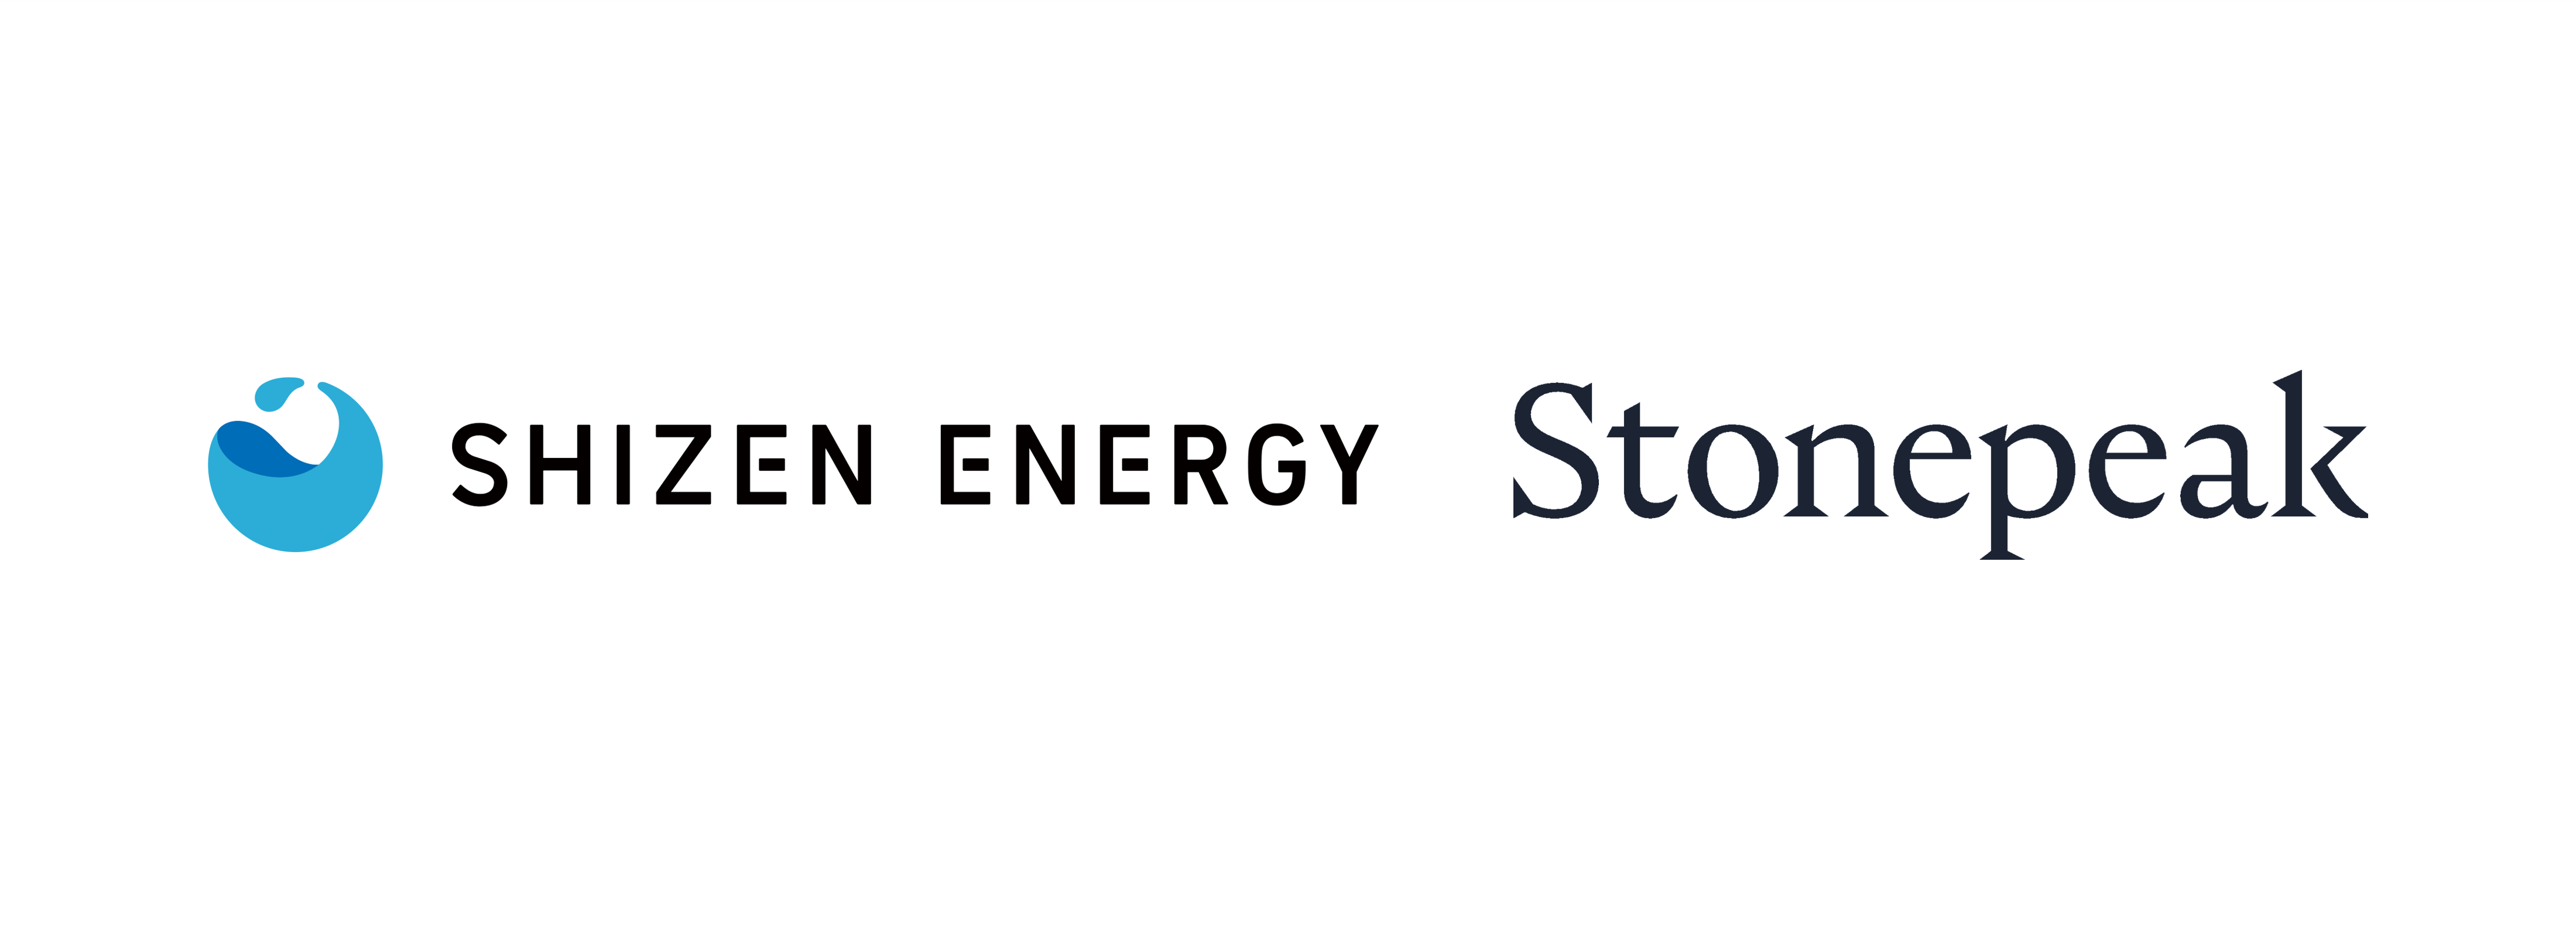 Stonepeak and Shizen Energy to Form Asian Onshore Wind Platform